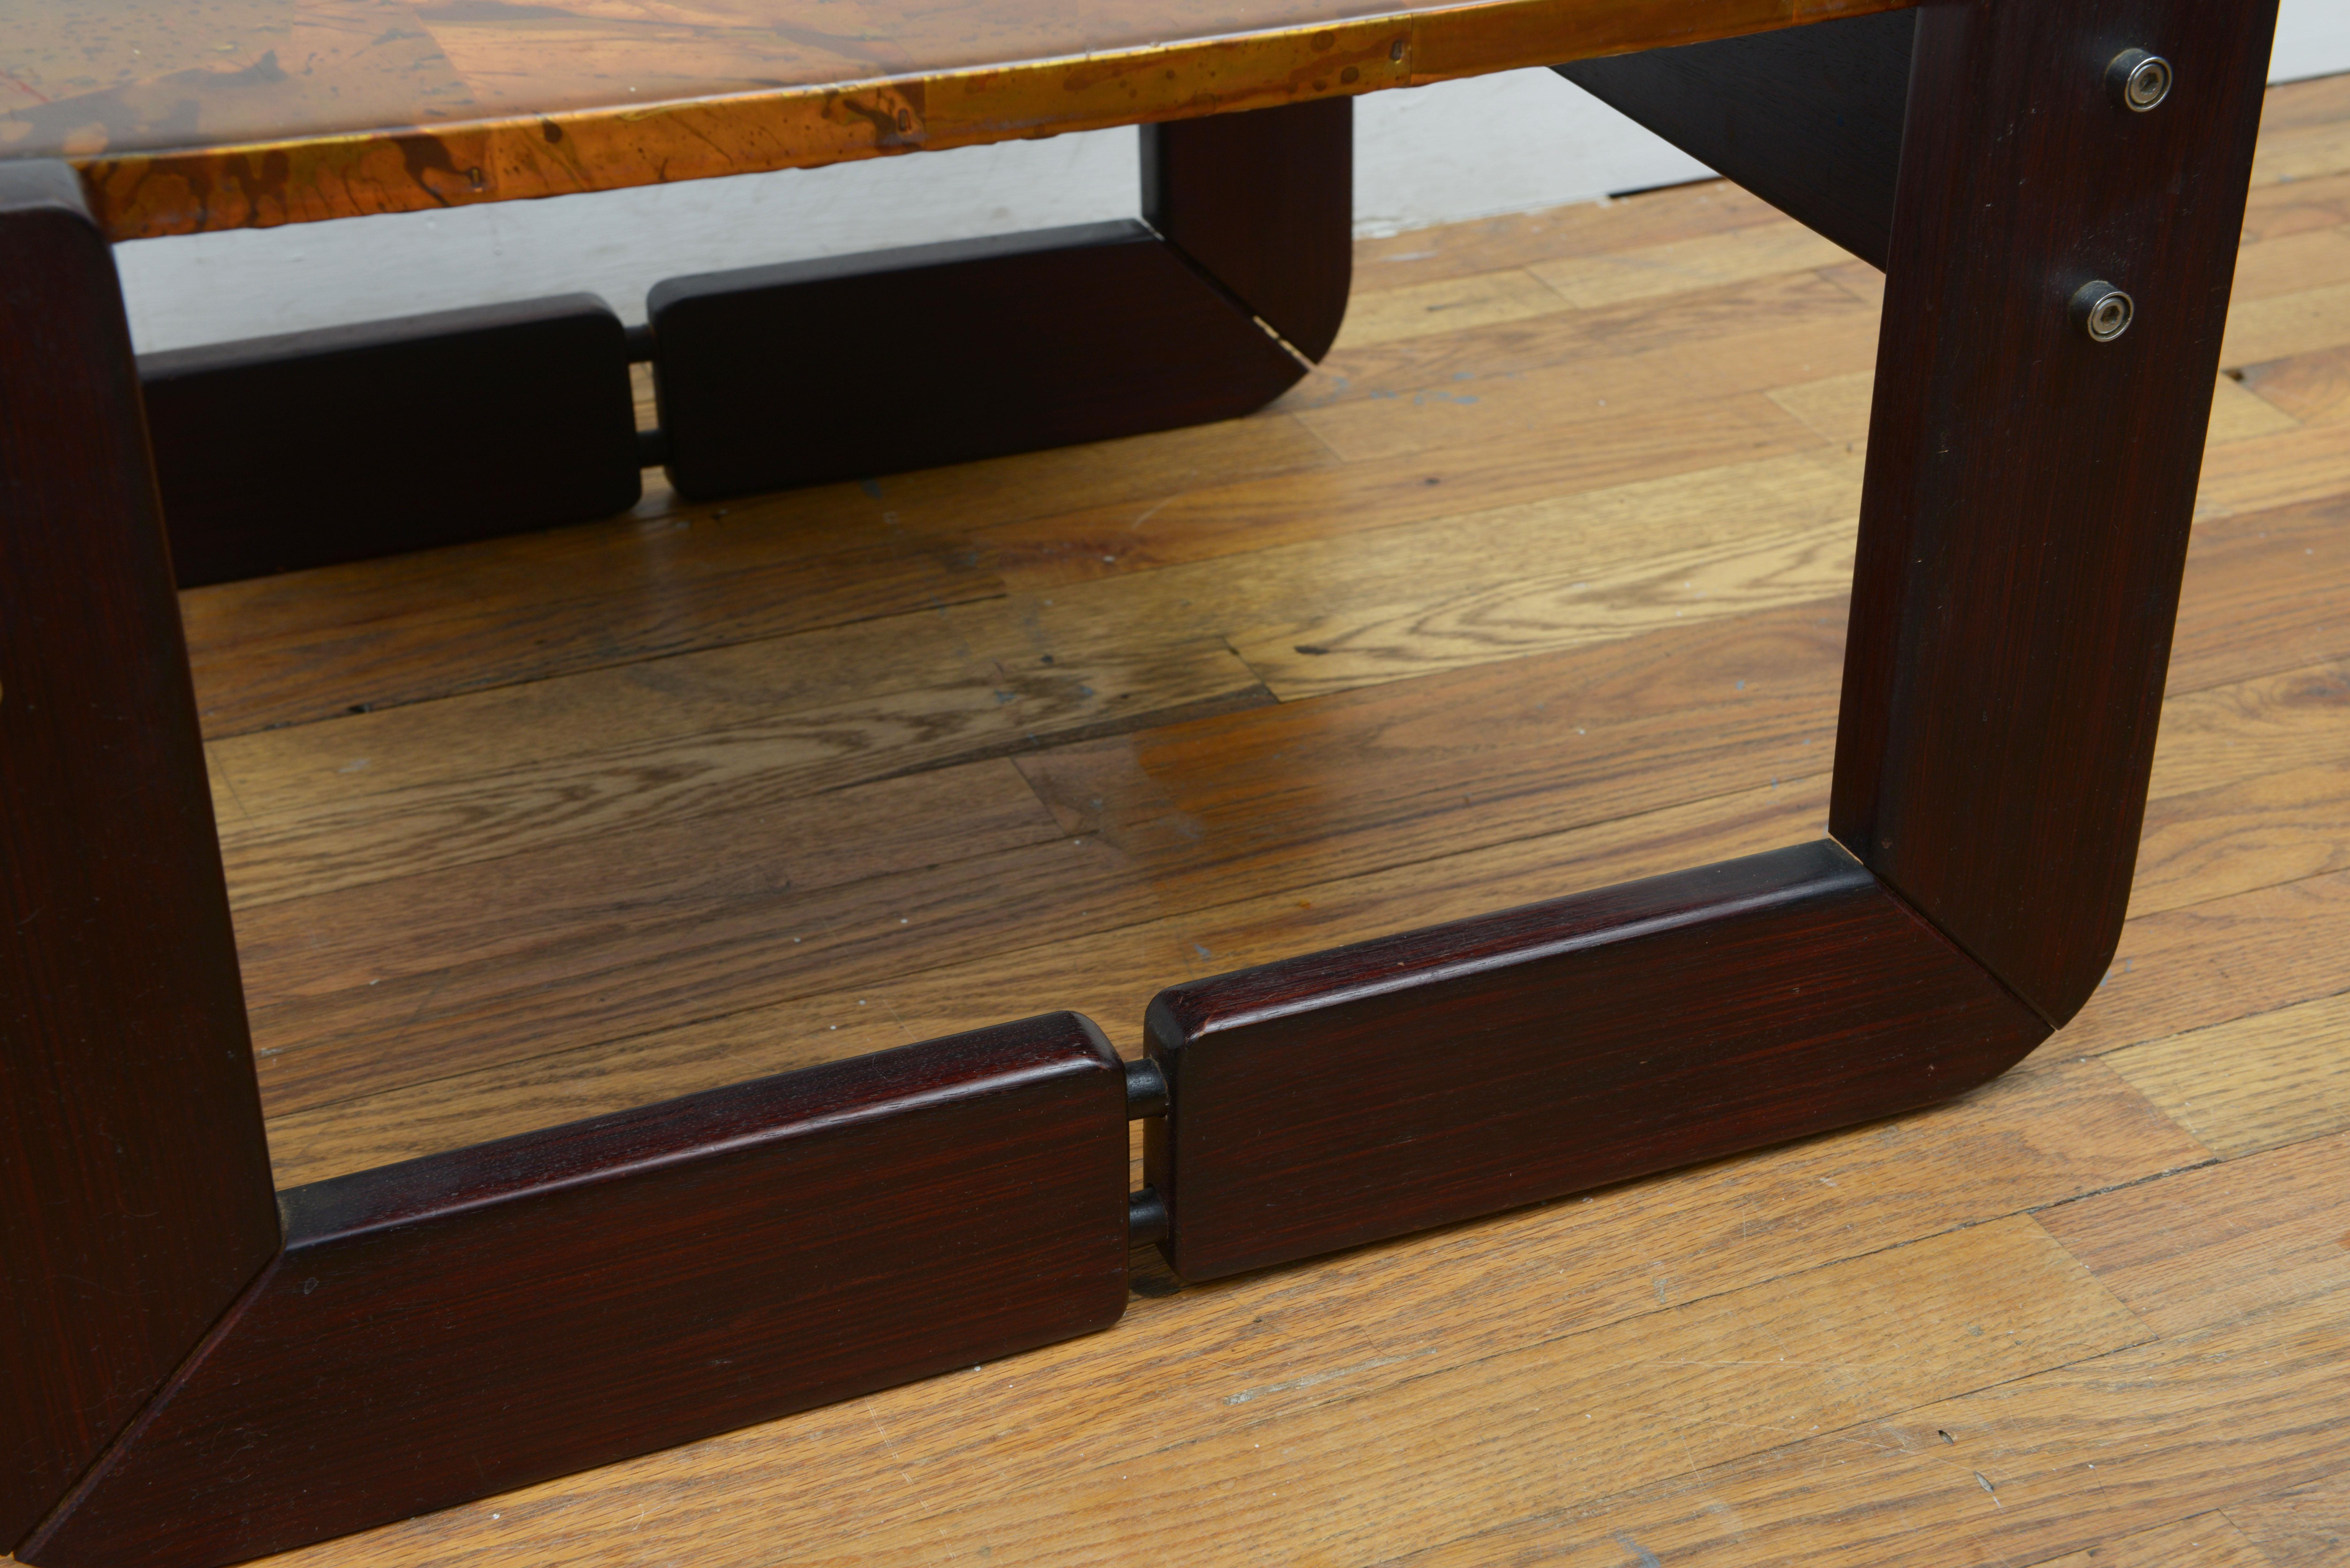 Percival Lafer Copper Patchwork and Rosewood End Tables 1970s, 'Signed' For Sale 2